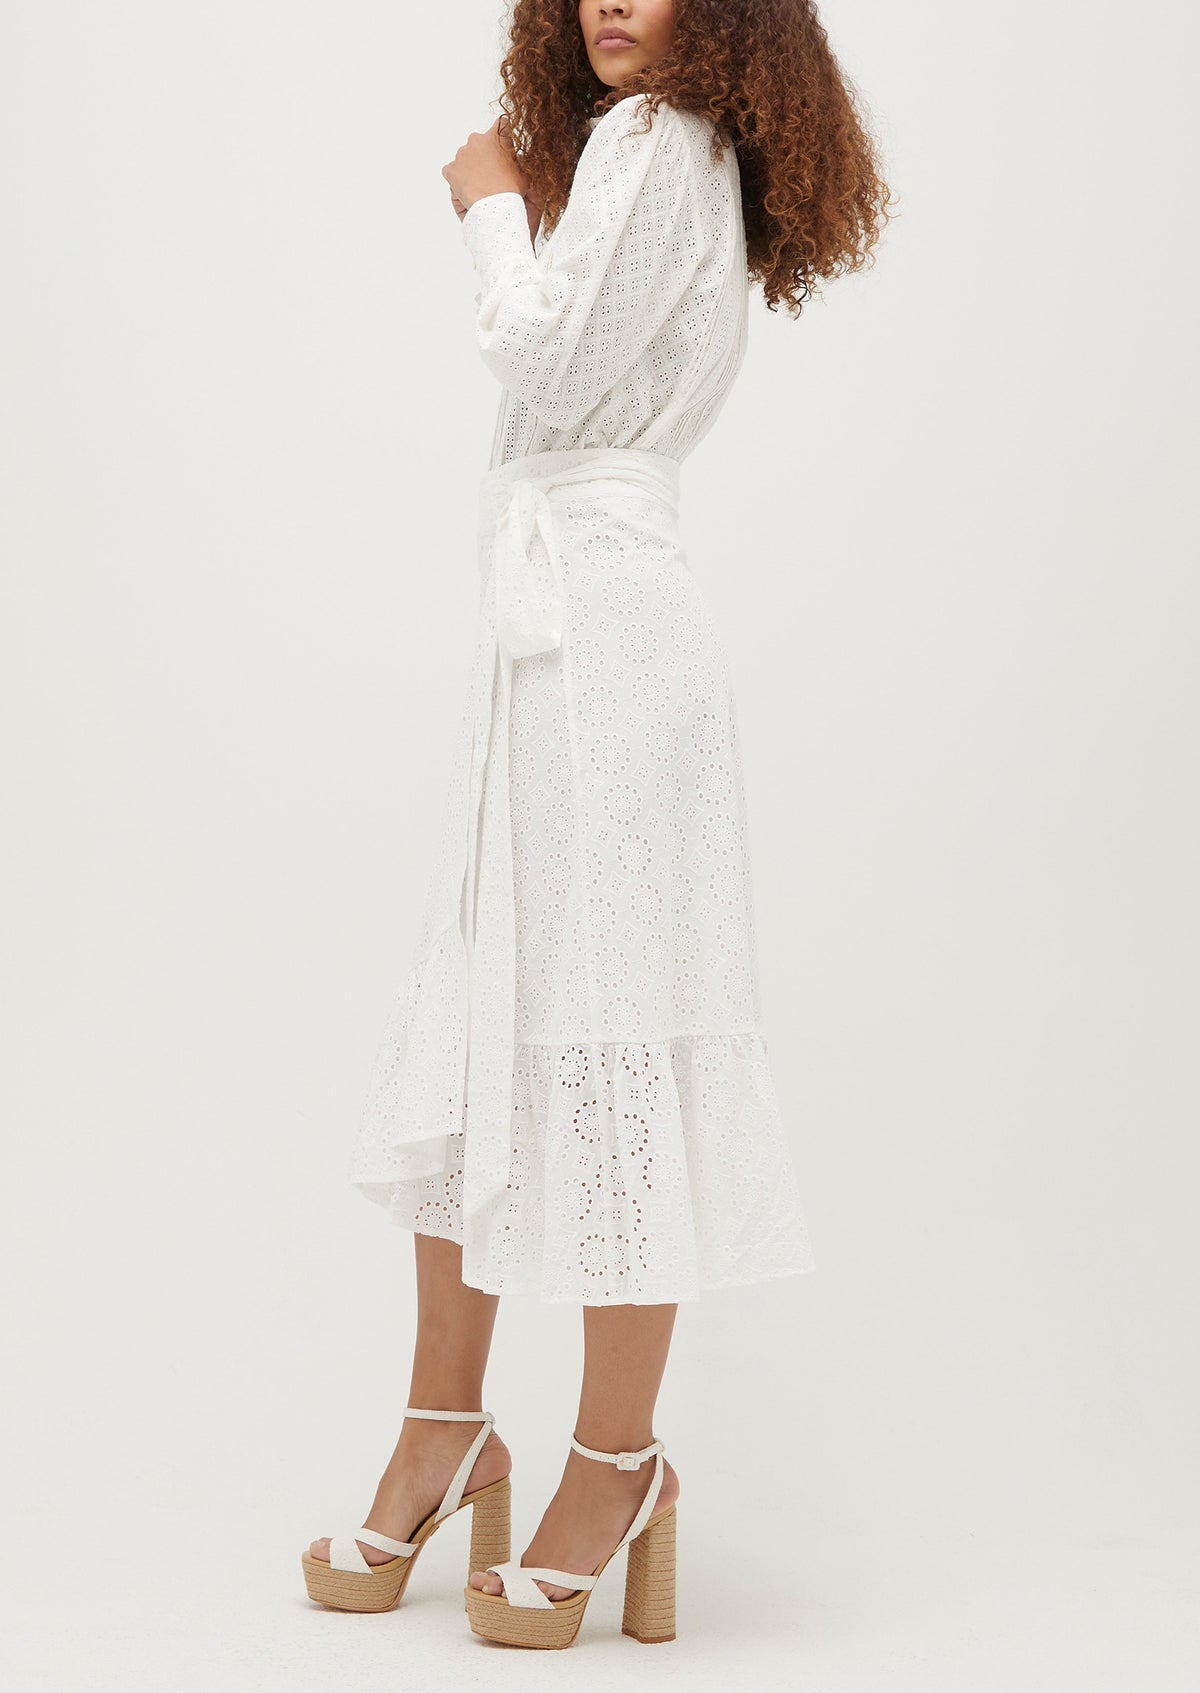 Elah is 5’11” and wears a size XS in the White Eyelet color: White Eyelet